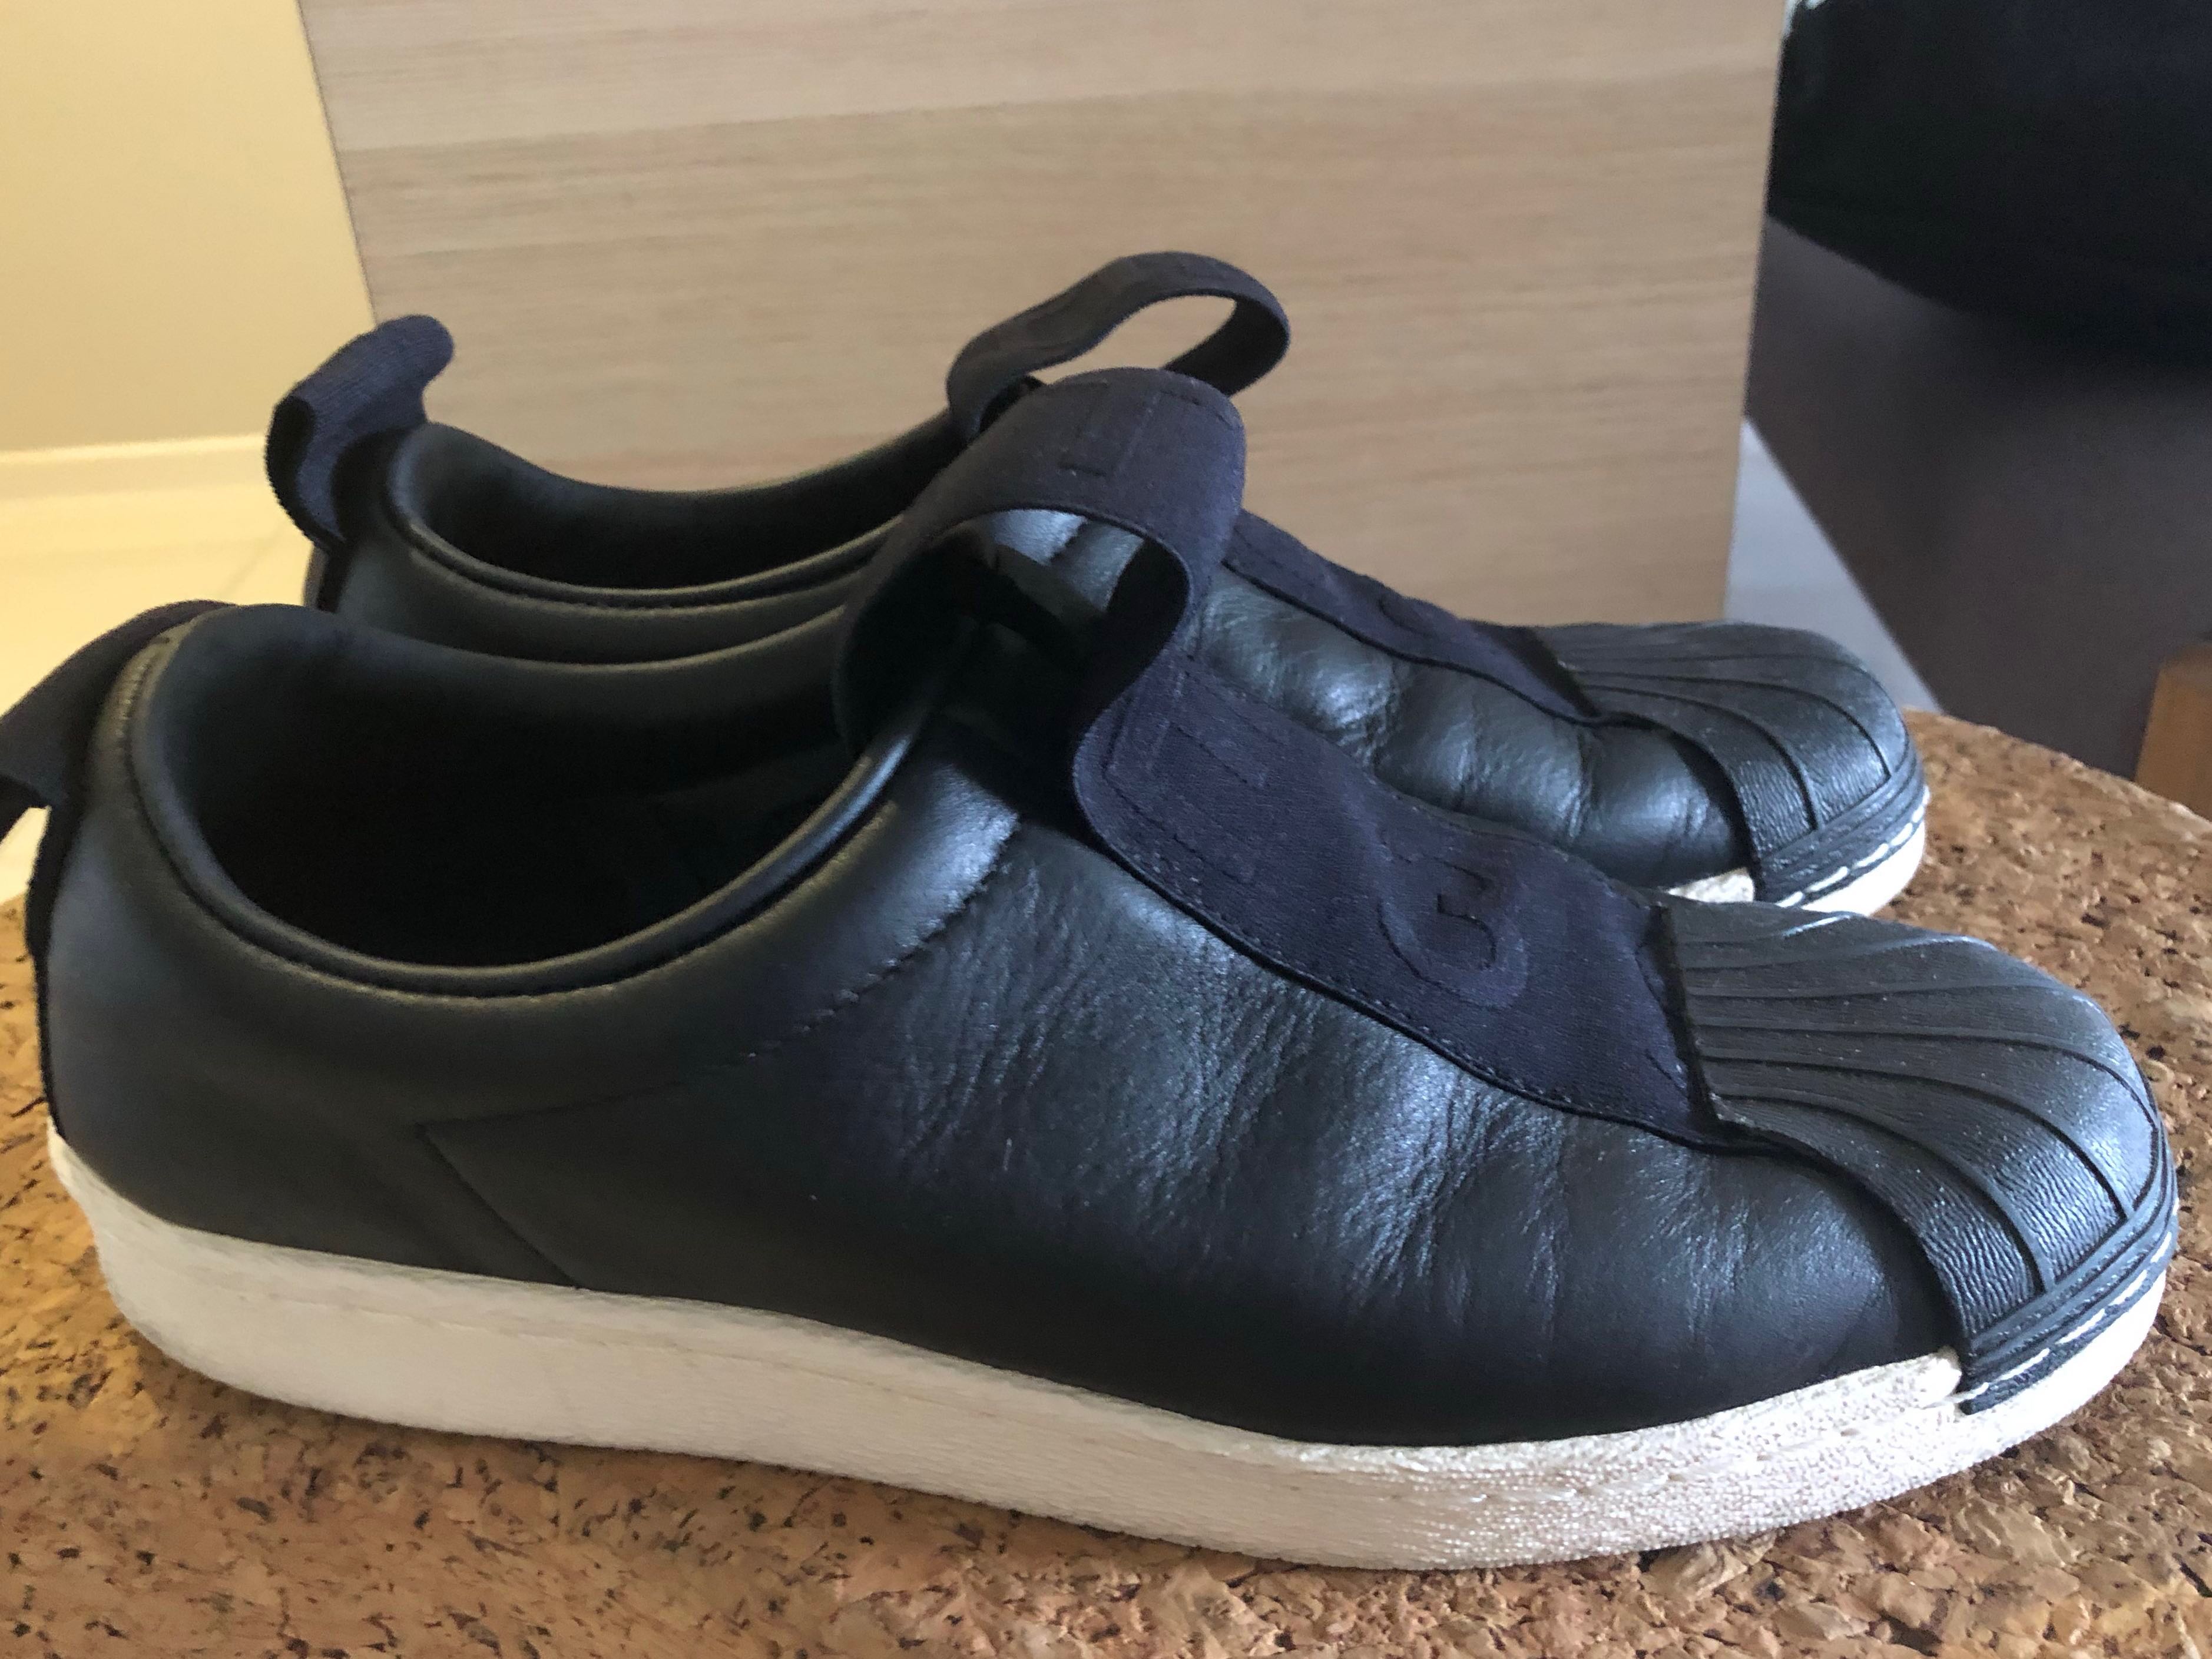 ADIDAS Originals Superstar Bw Adidas Slip On With Black Leather And Upper  Elastic Strap in Nero, Women's Fashion, Footwear, Sneakers on Carousell